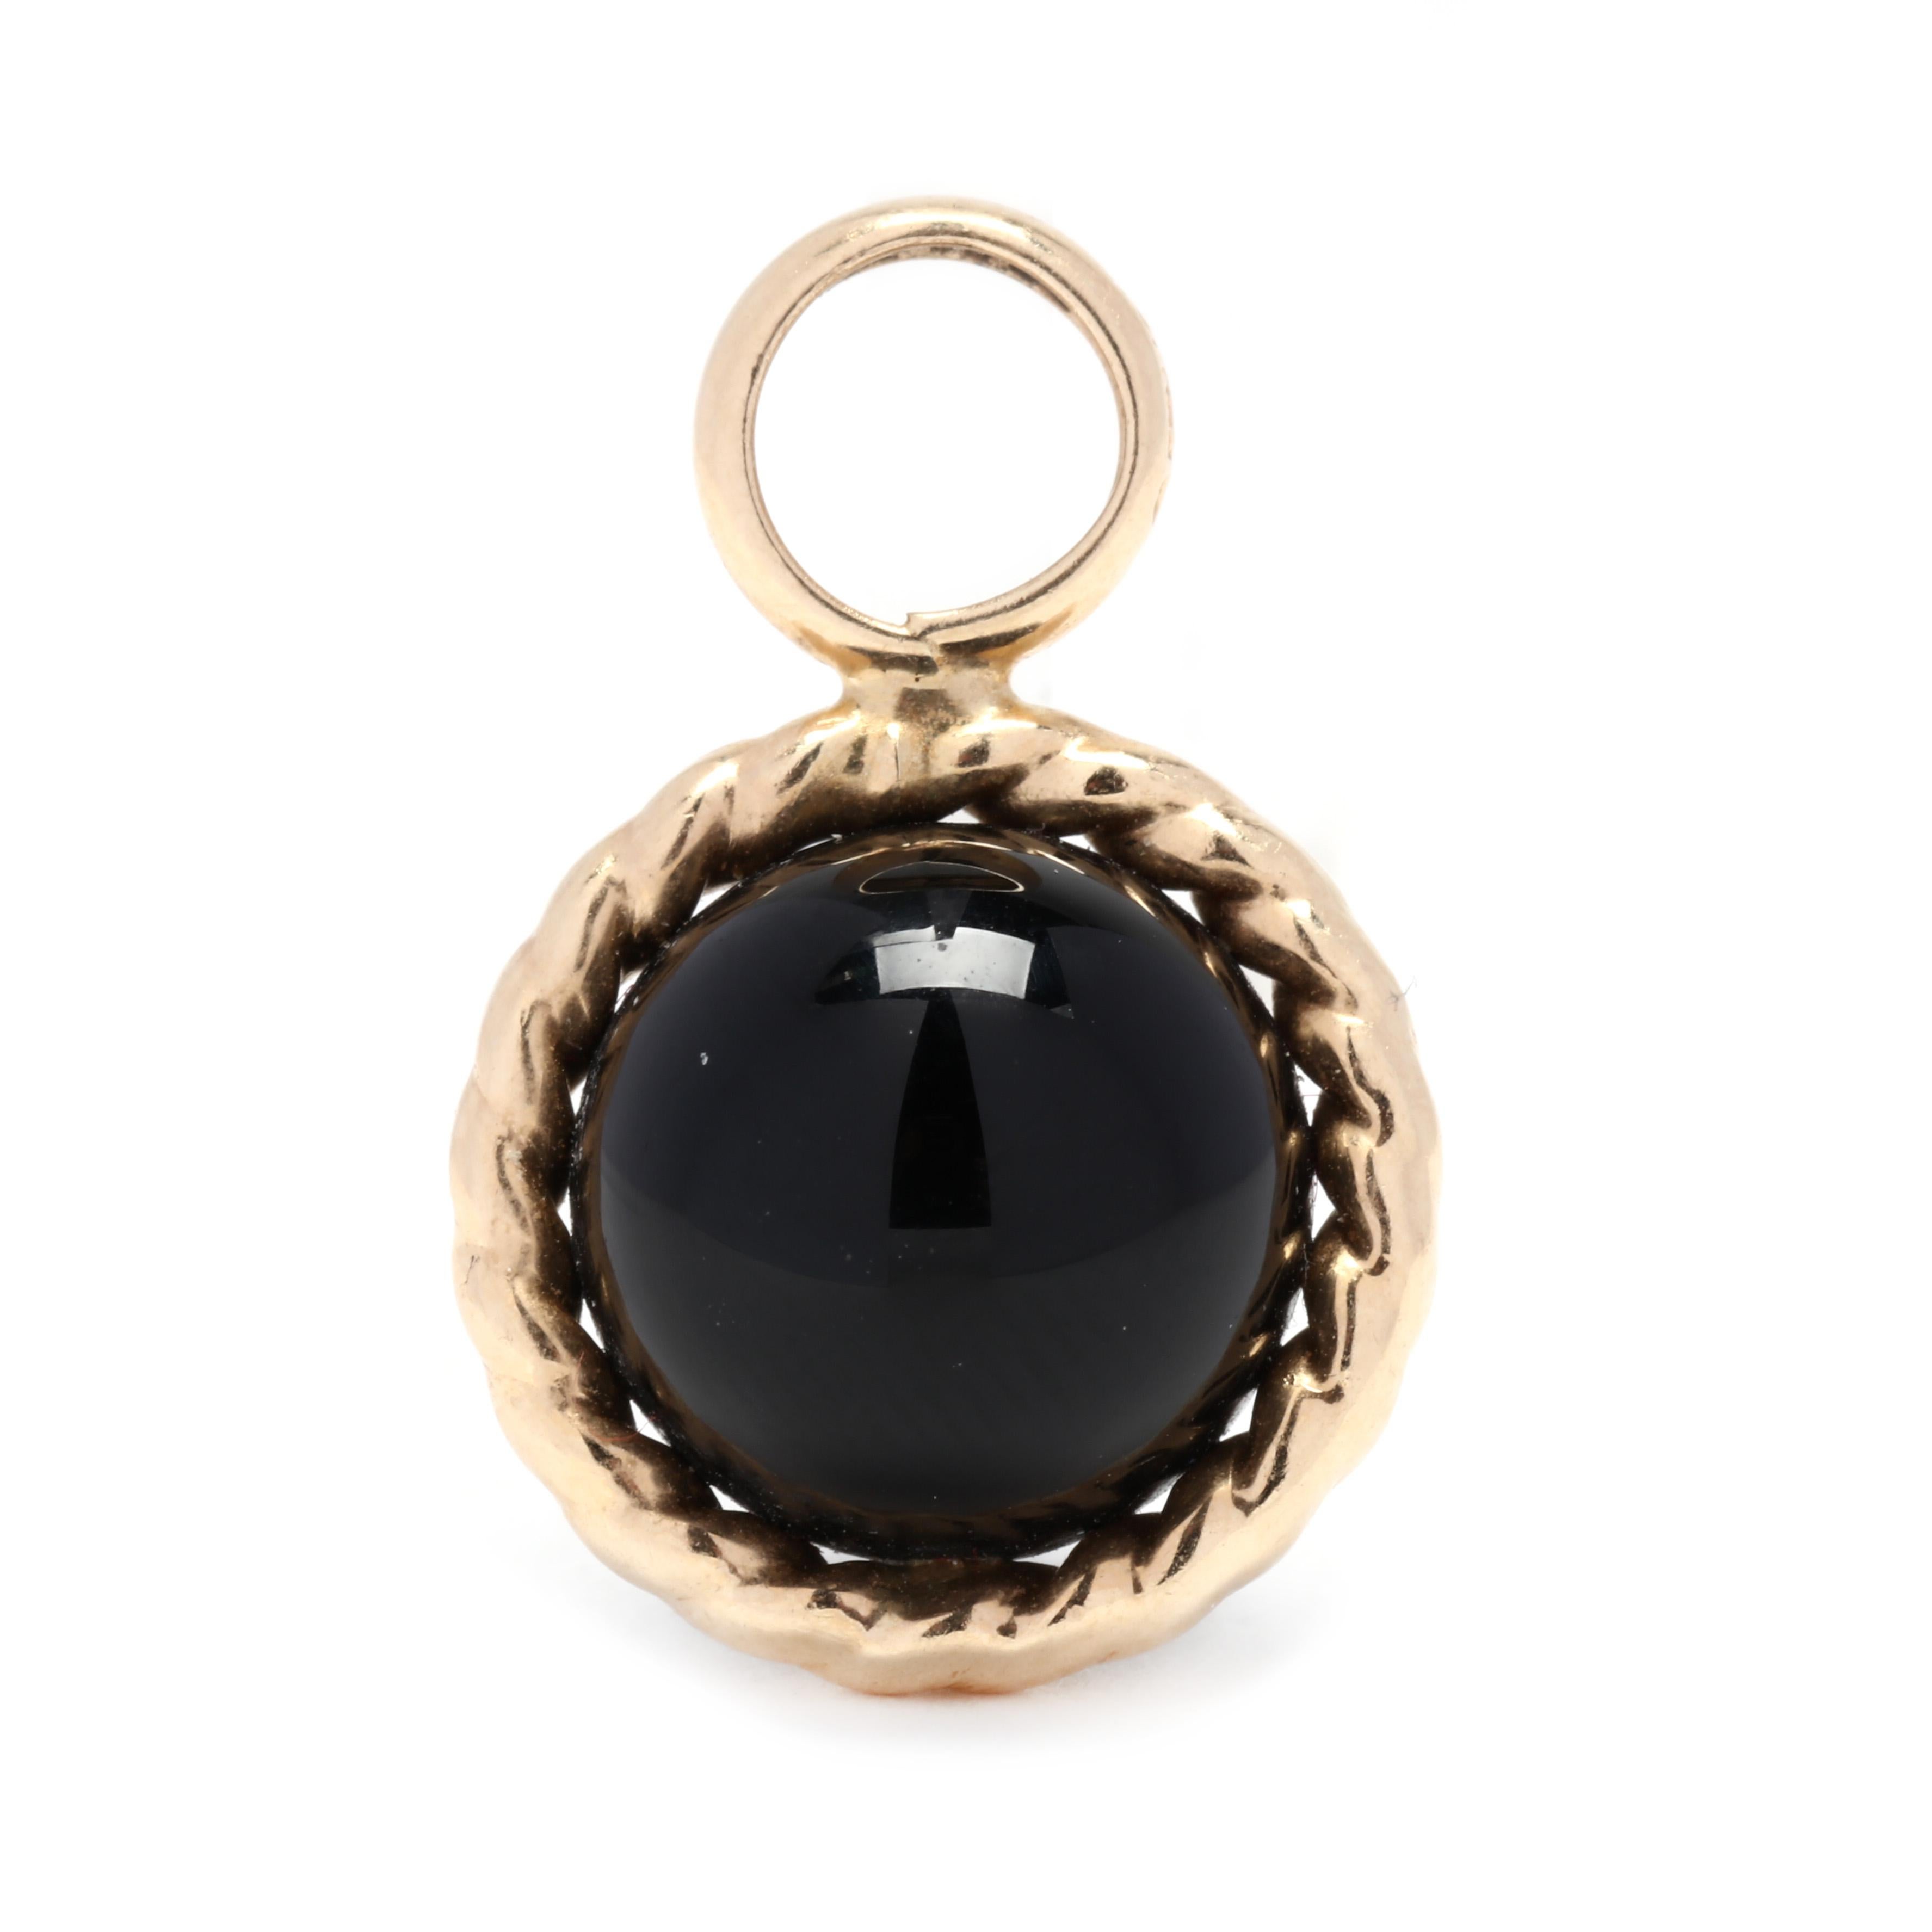 A 14 karat yellow gold black onyx bead charm. This charm features a round black onyx bead with a rope border and a round ring at the top to string on a chain.



Length: 3/4 in.



Width: 1/2 in.



Weight: 1.05 dwts.